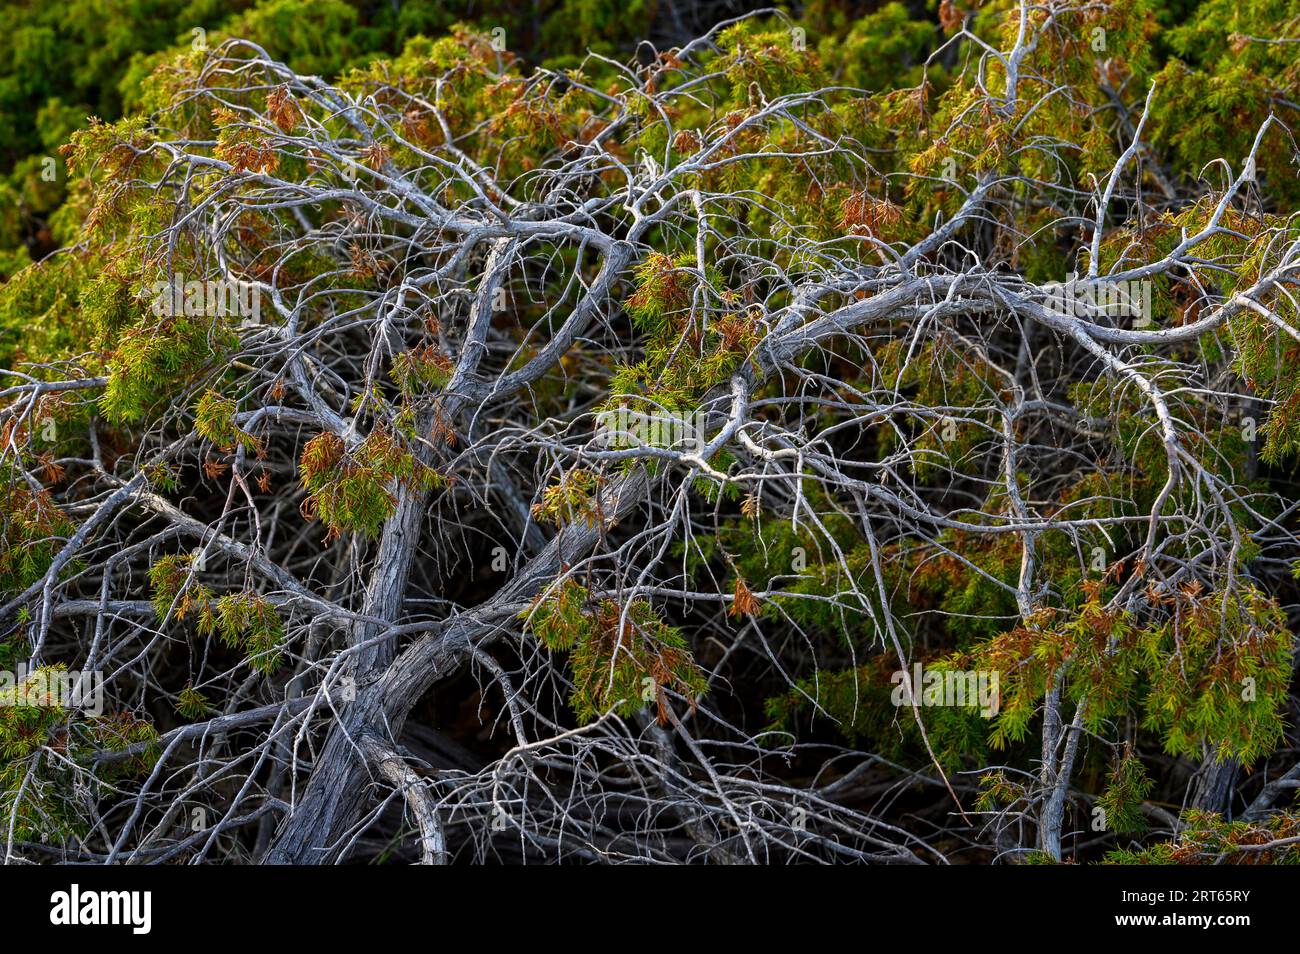 Closeup of an old juniper bush on one of the islands in the Kragero archipelago, Telemark county, Norway. Stock Photo